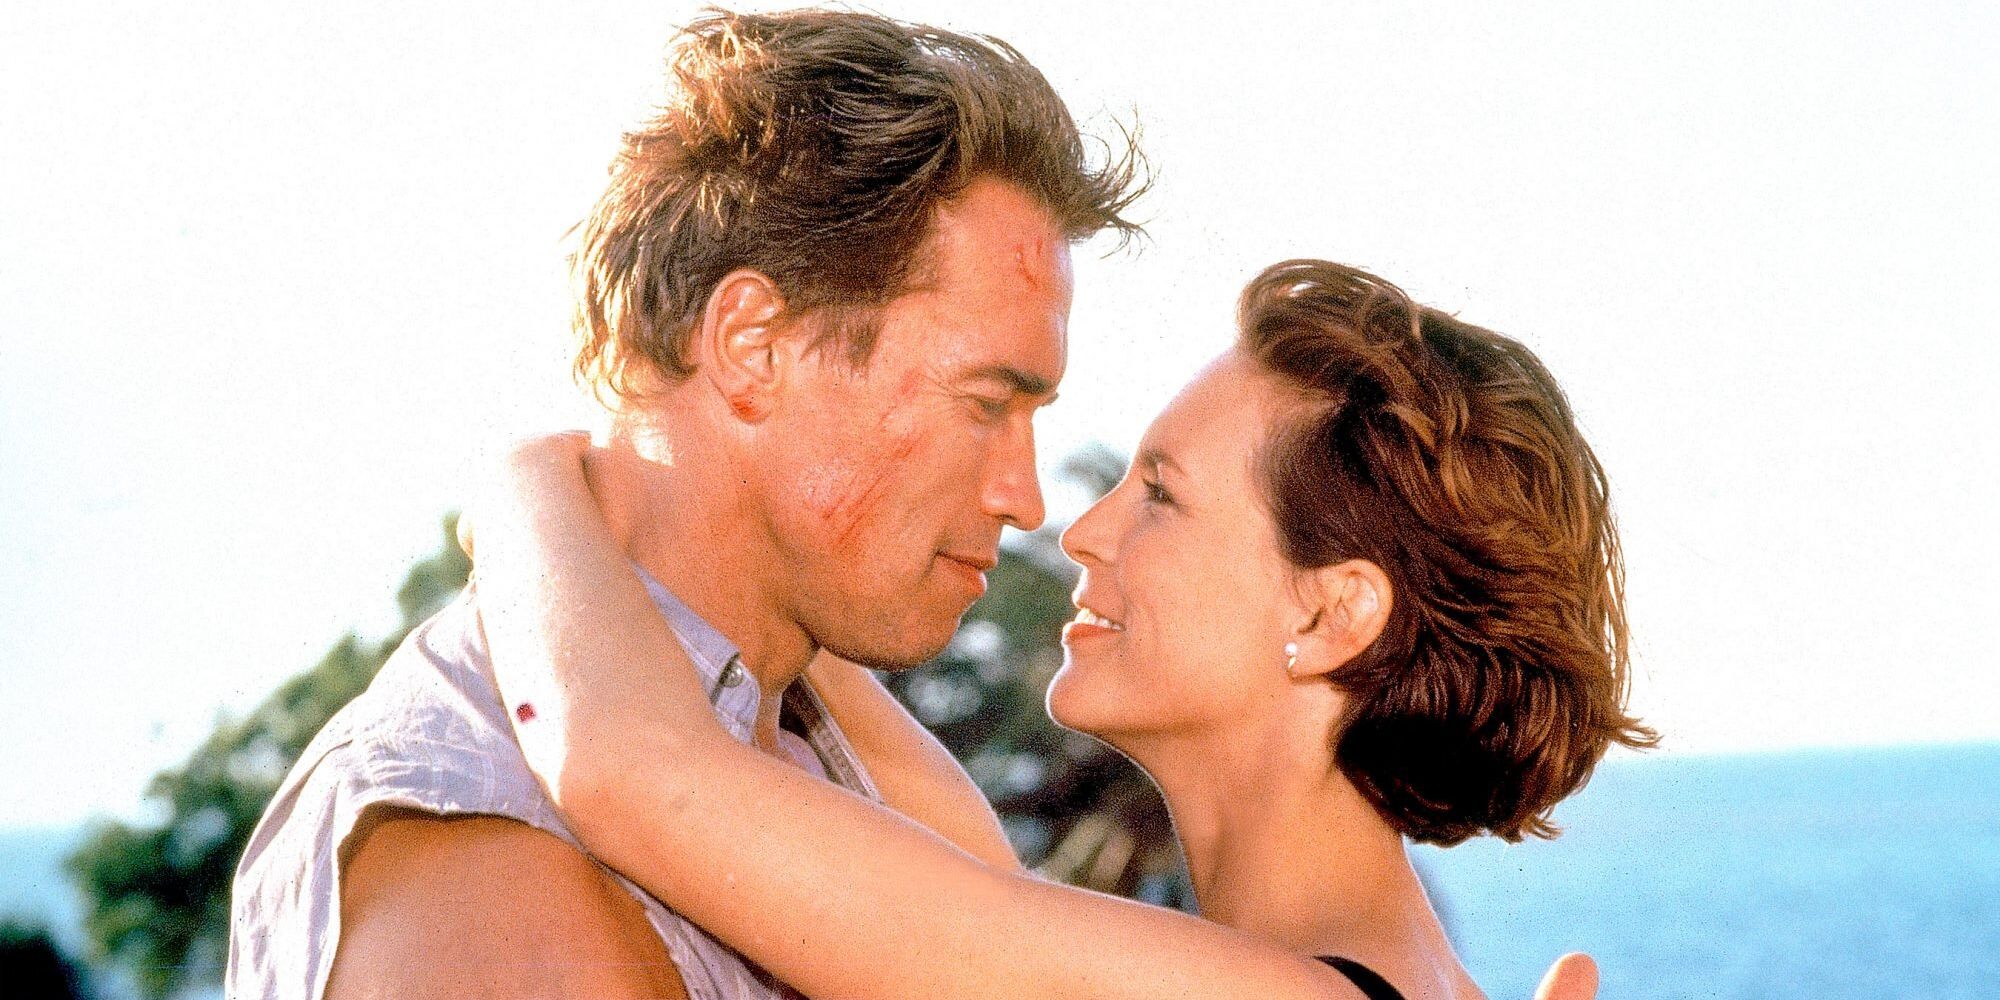 Arnold Schwarzenegger and Jamie Lee Curtis embrace each other on the beach in True Lies